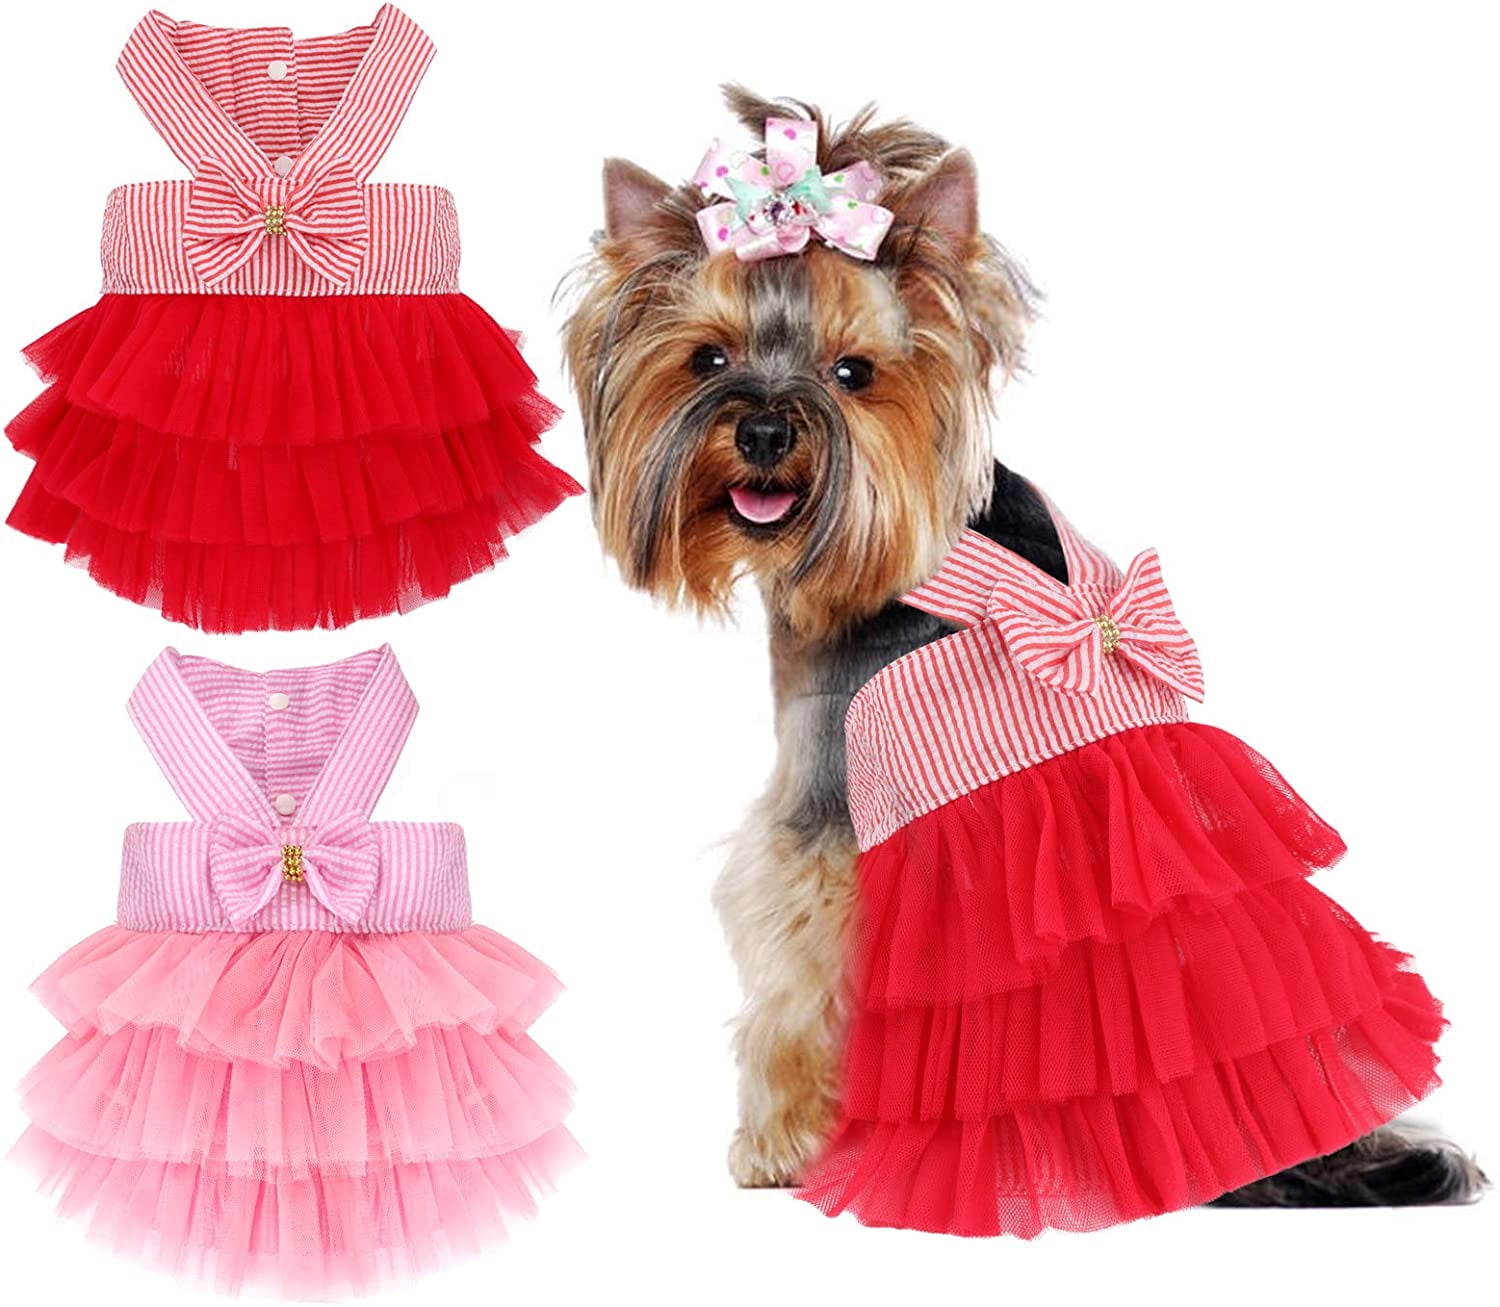 A Dog Birthday Princess Tutu Dress for Small Dogs Girl Adjustable Puppy Cat Birthday Party hat Cake Shaped 